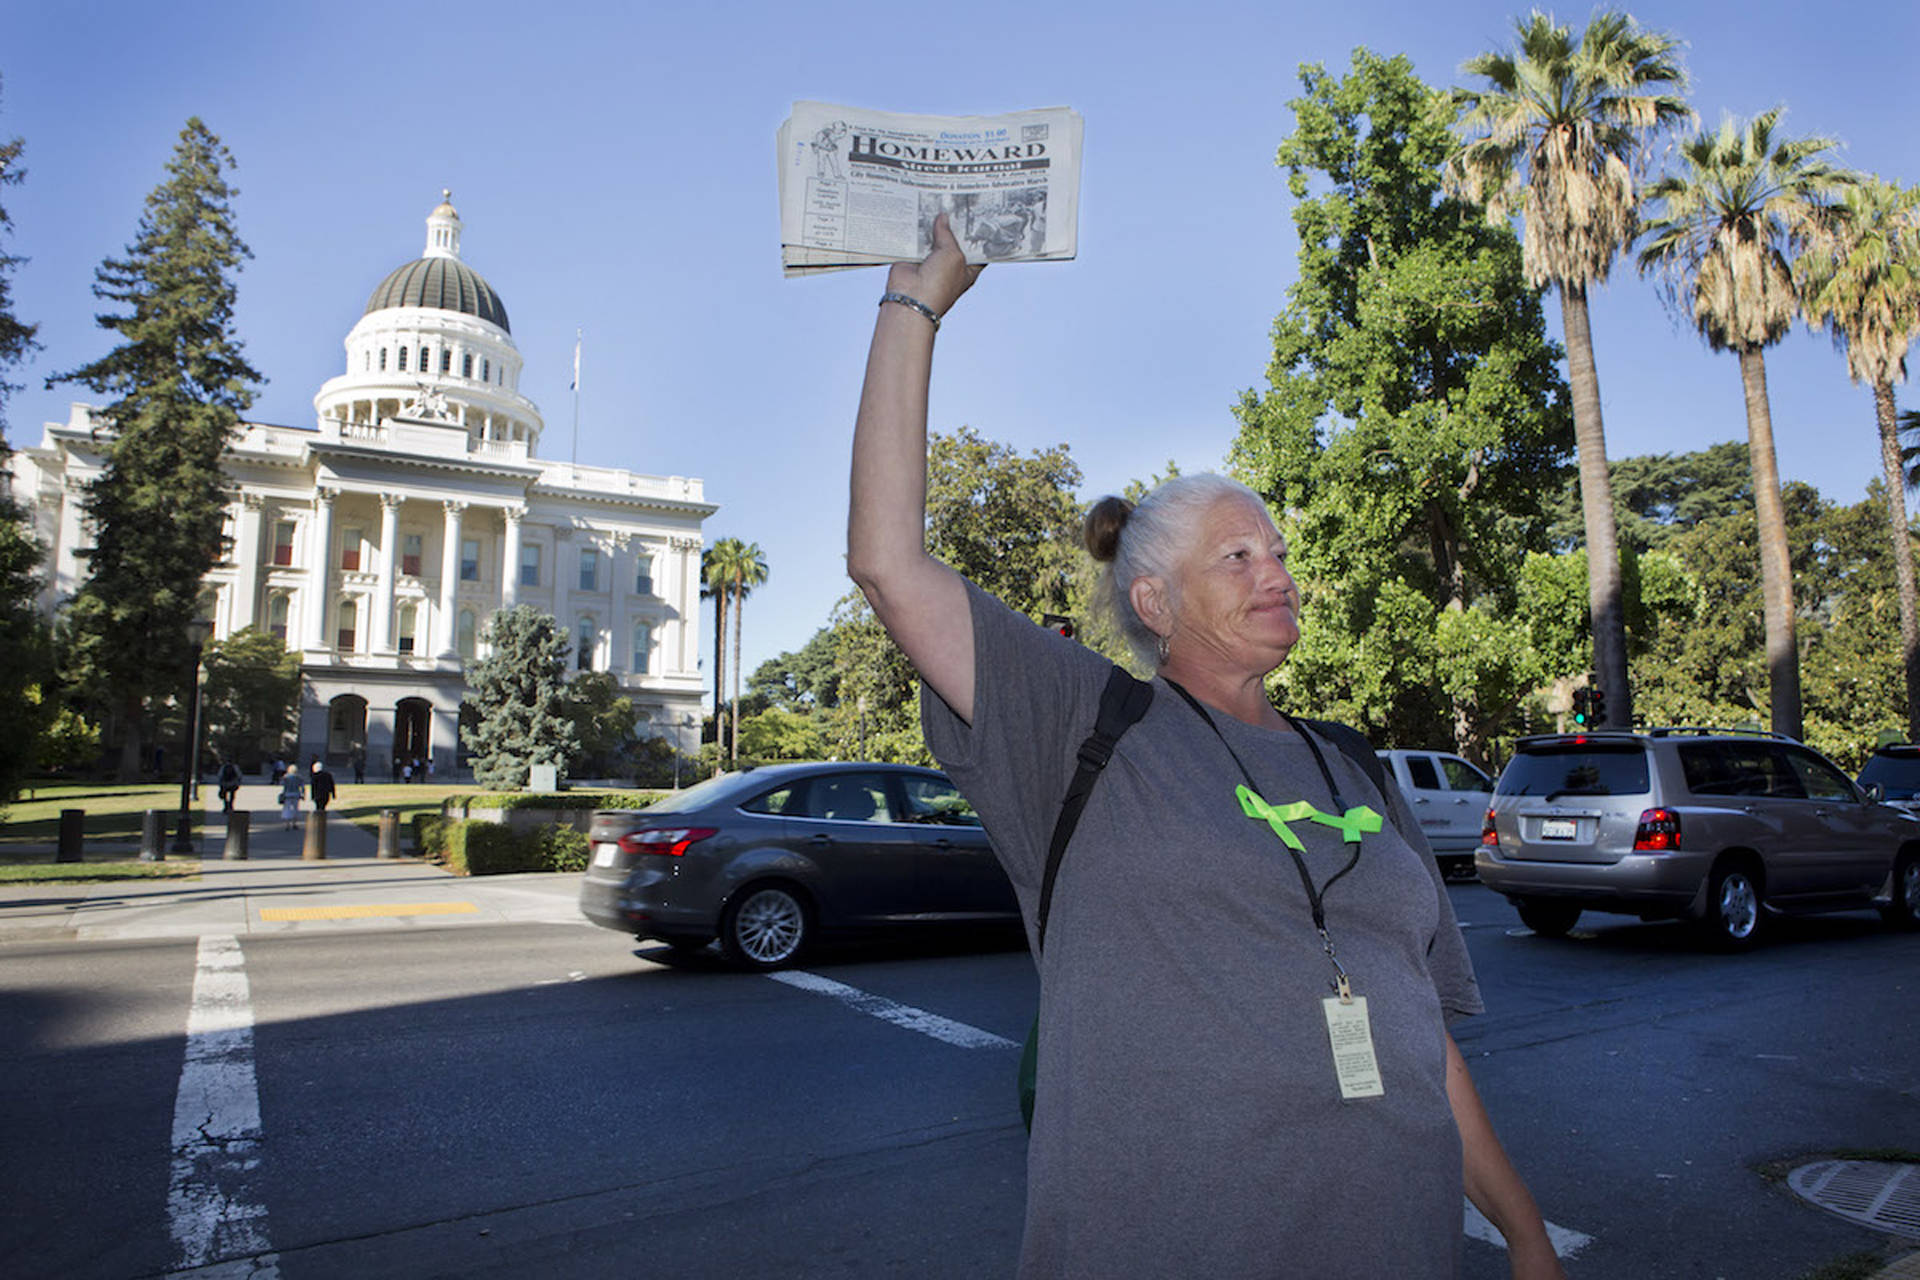 Debbie Bartley sells the Homeward newspaper near the state Capitol in Sacramento.  Steve Yeater/CALmatters